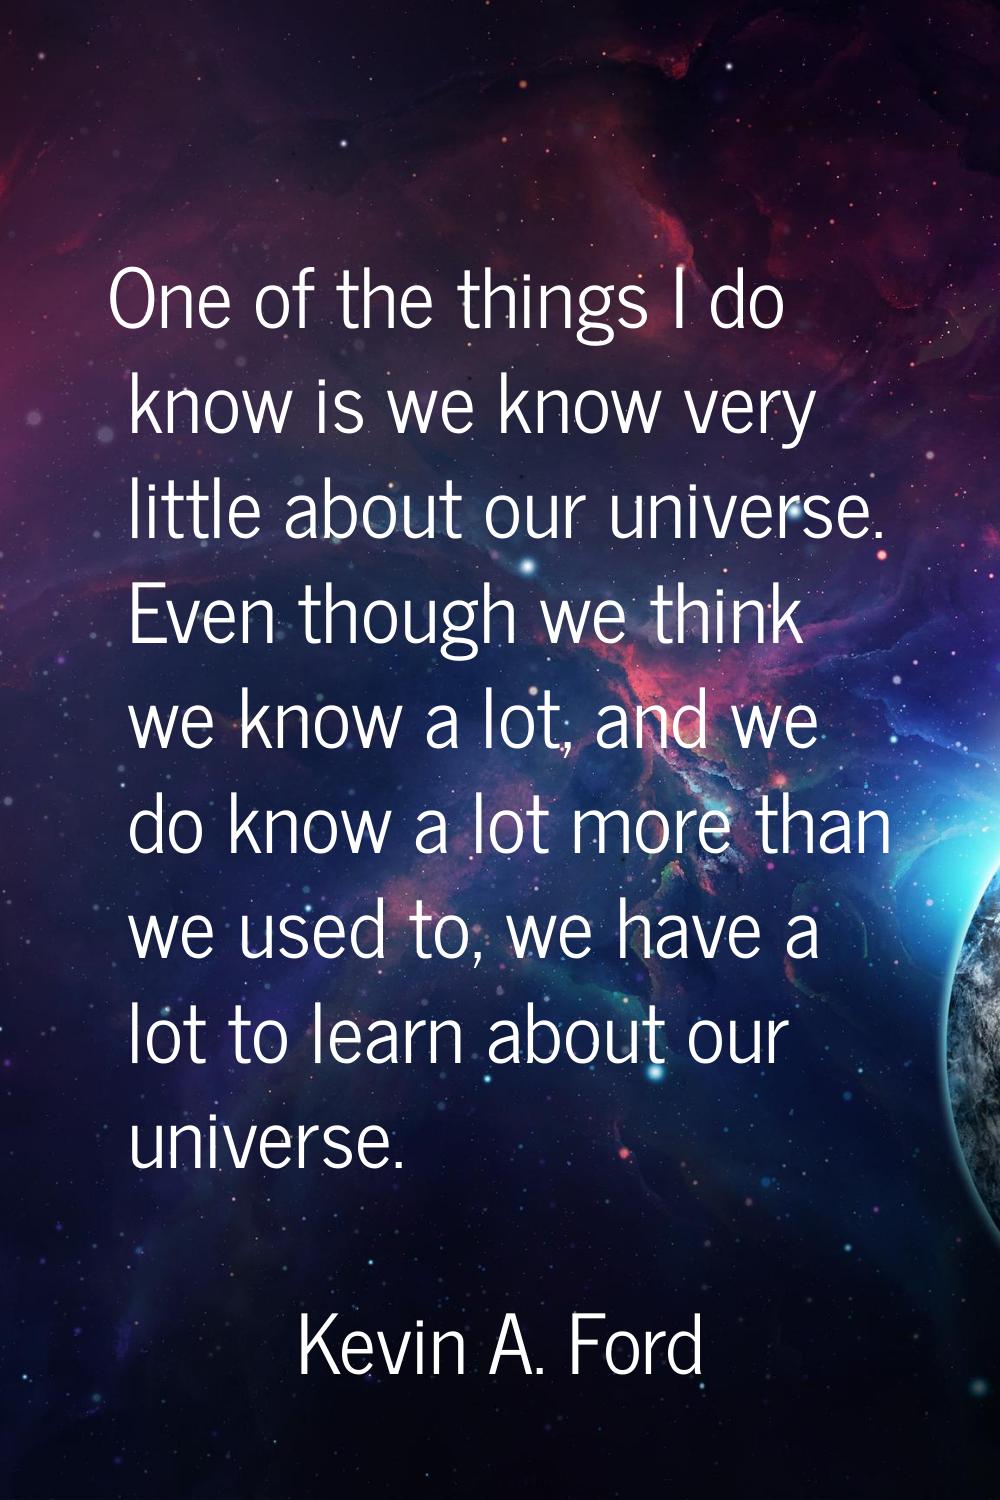 One of the things I do know is we know very little about our universe. Even though we think we know